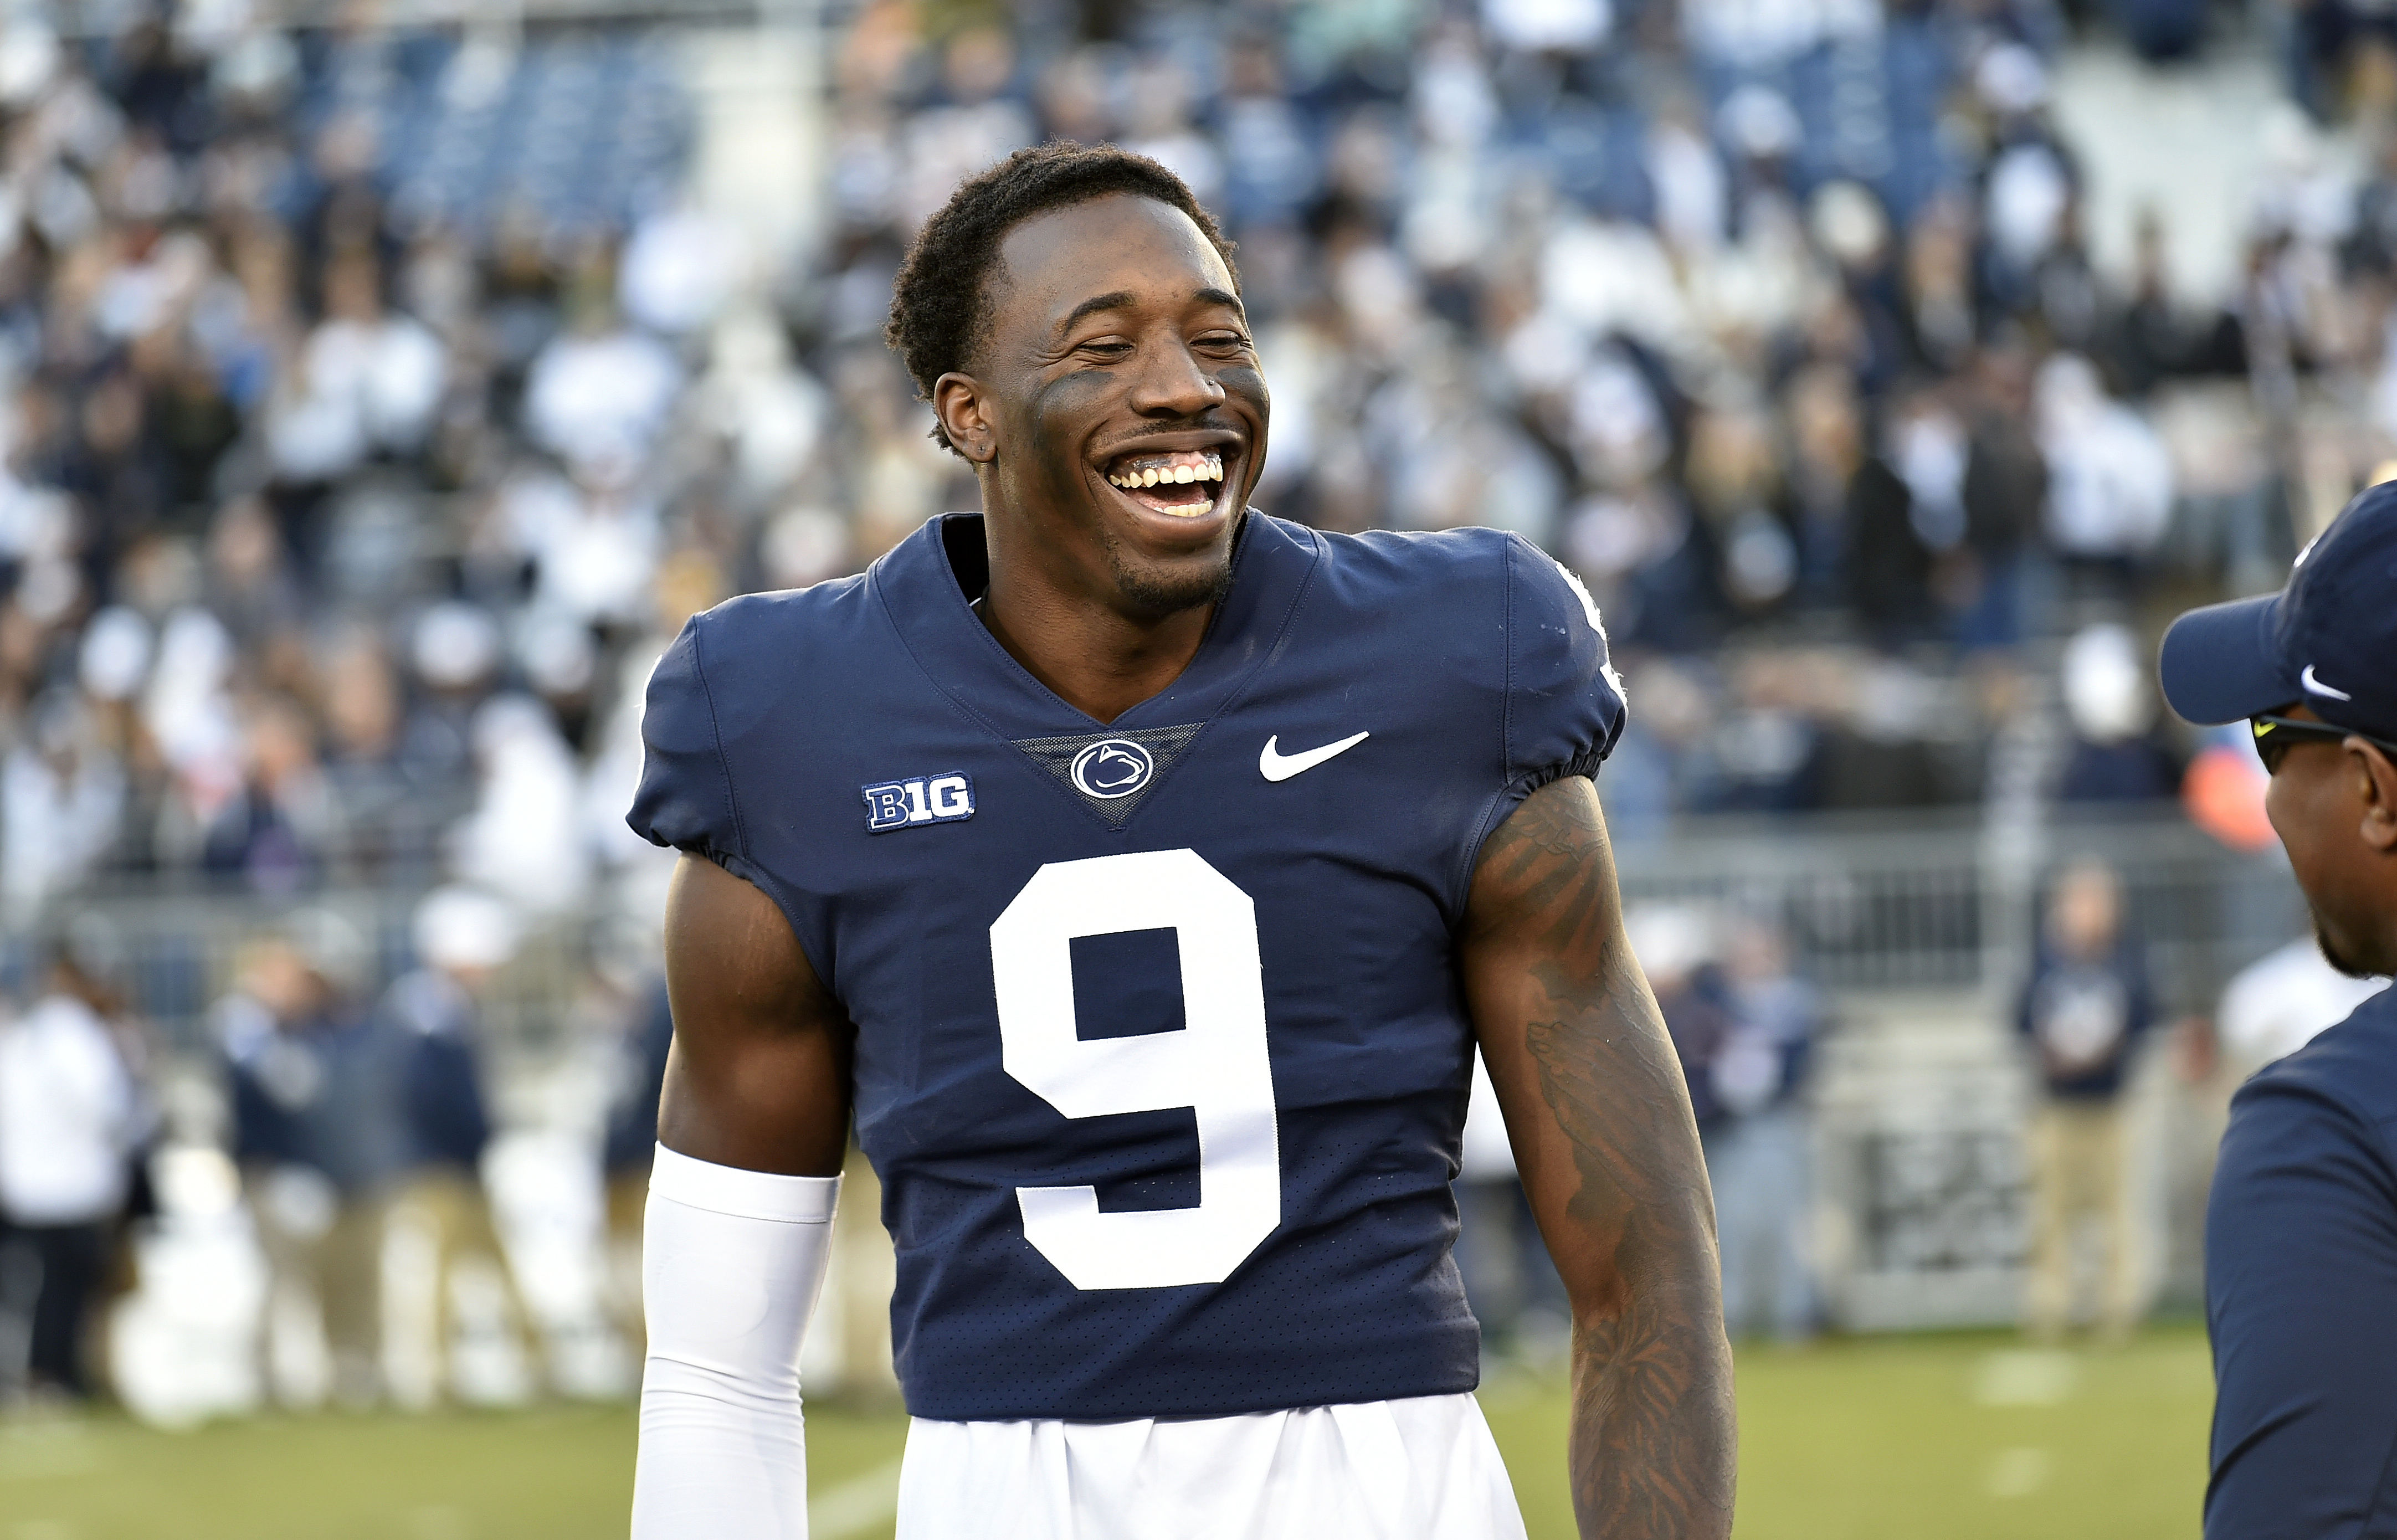 Penn State cornerback Joey Porter, Jr. (9) smiles during the senior day ceremonies before the Michigan State Spartans versus Penn State Nittany Lions game on November 26, 2022 at Beaver Stadium in University Park, PA.